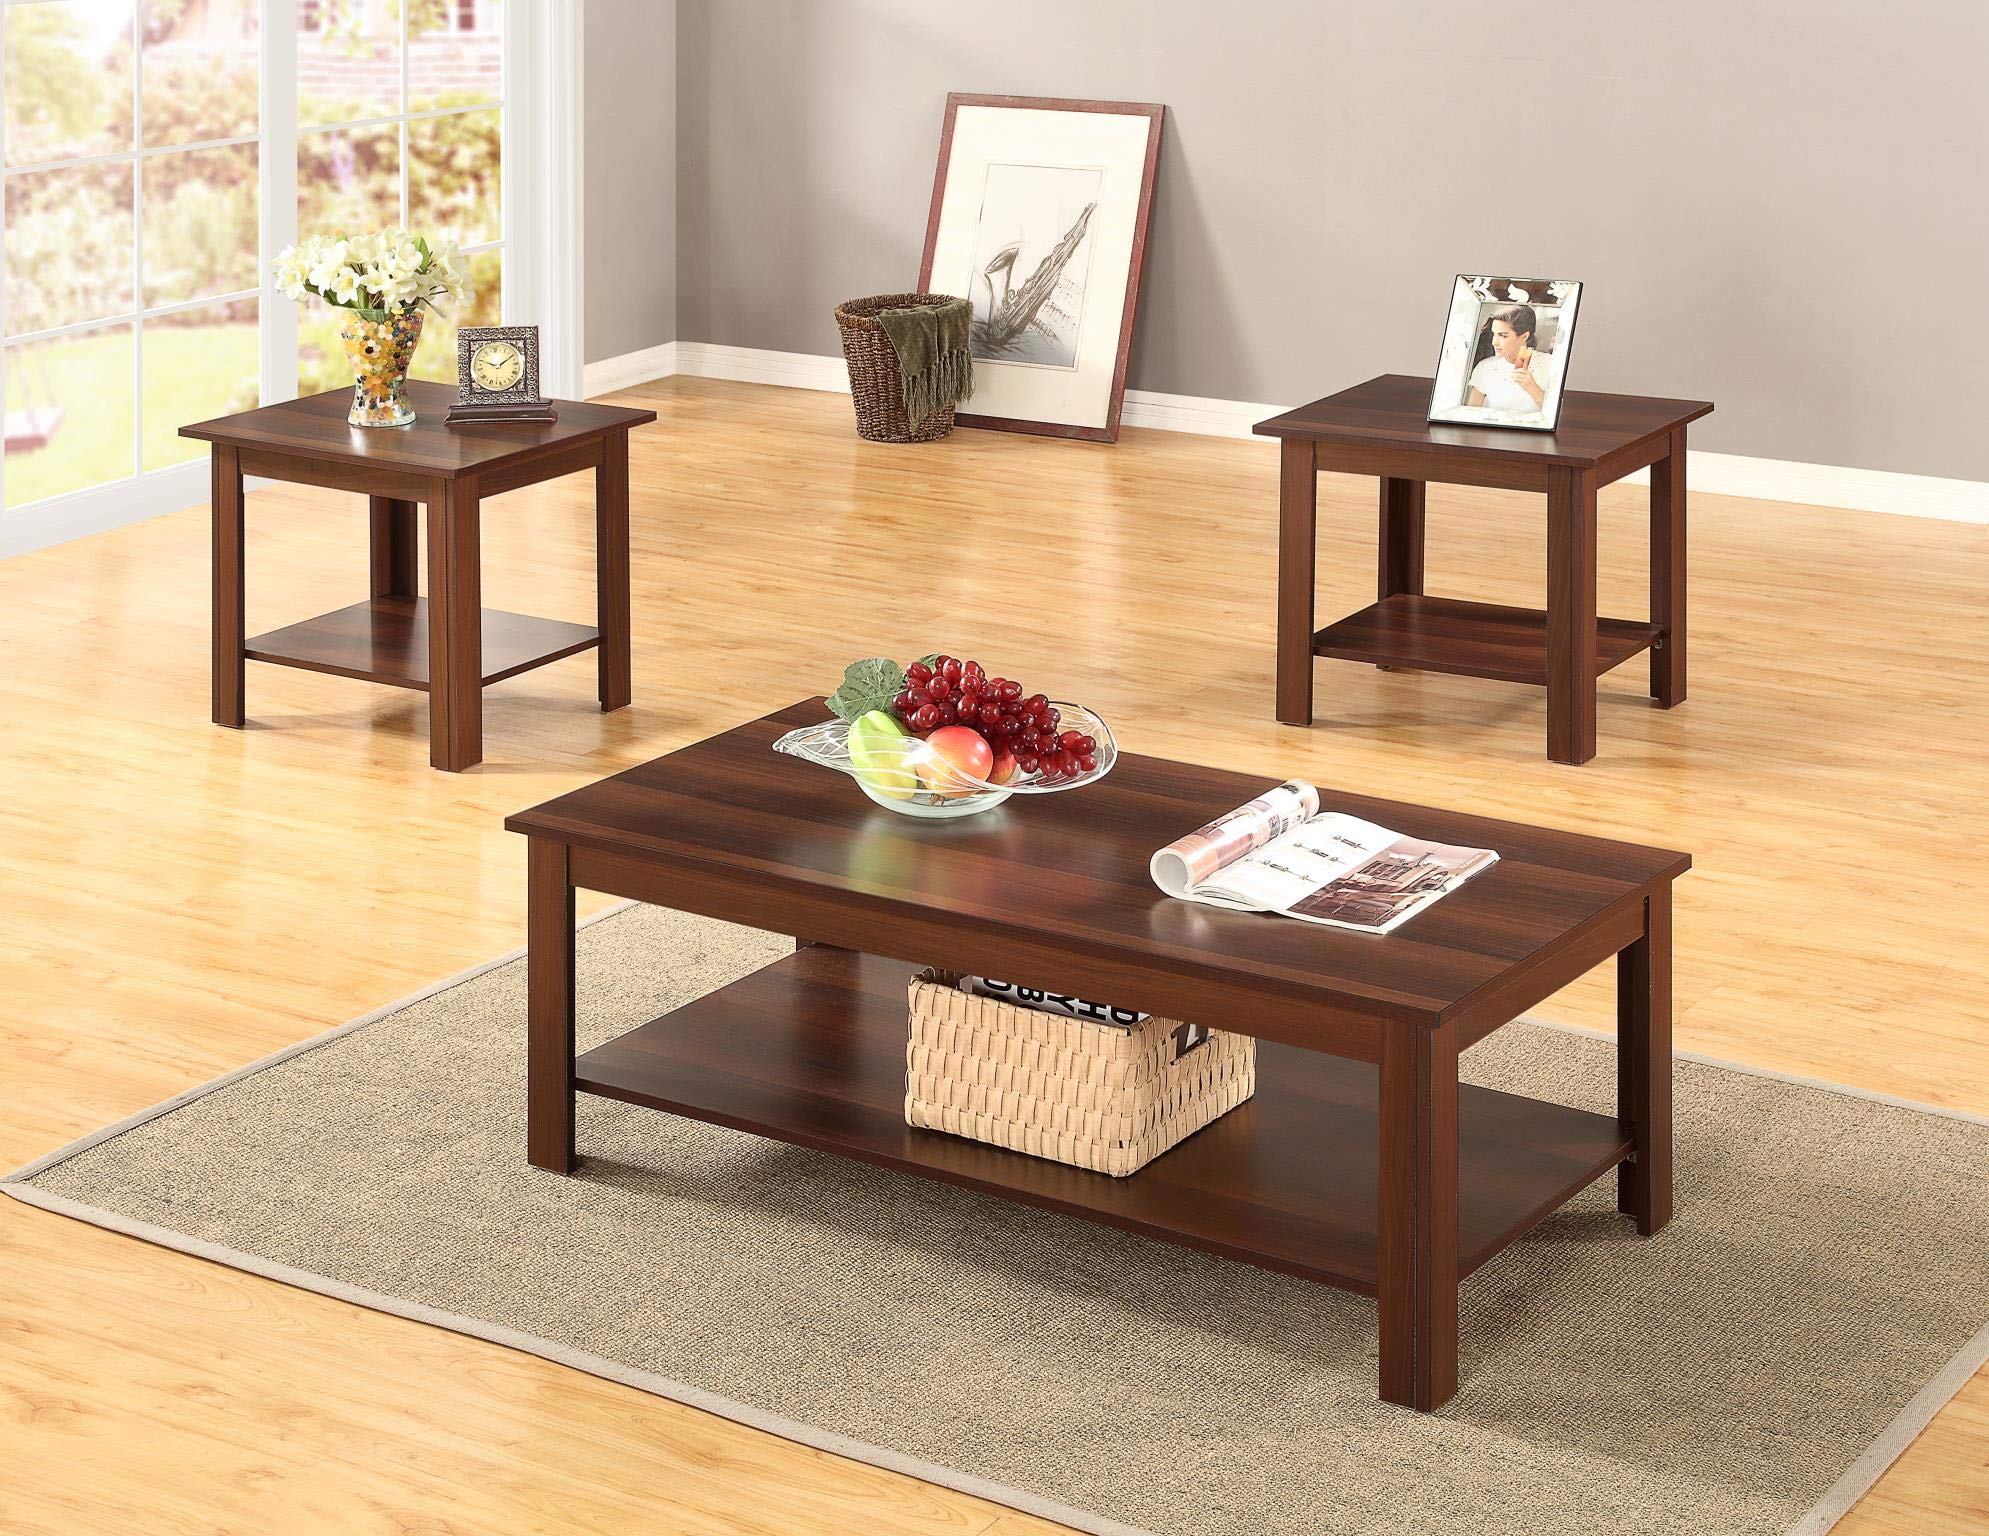 GTU Furniture Occassional Modern, Contemporary, Transitional, Traditional, 3-Piece Square Accent Table Set with 1 Coffee Table, and 2 End Tables in a Rich Dark Oak Brown Wood Finish, with Storage Shel